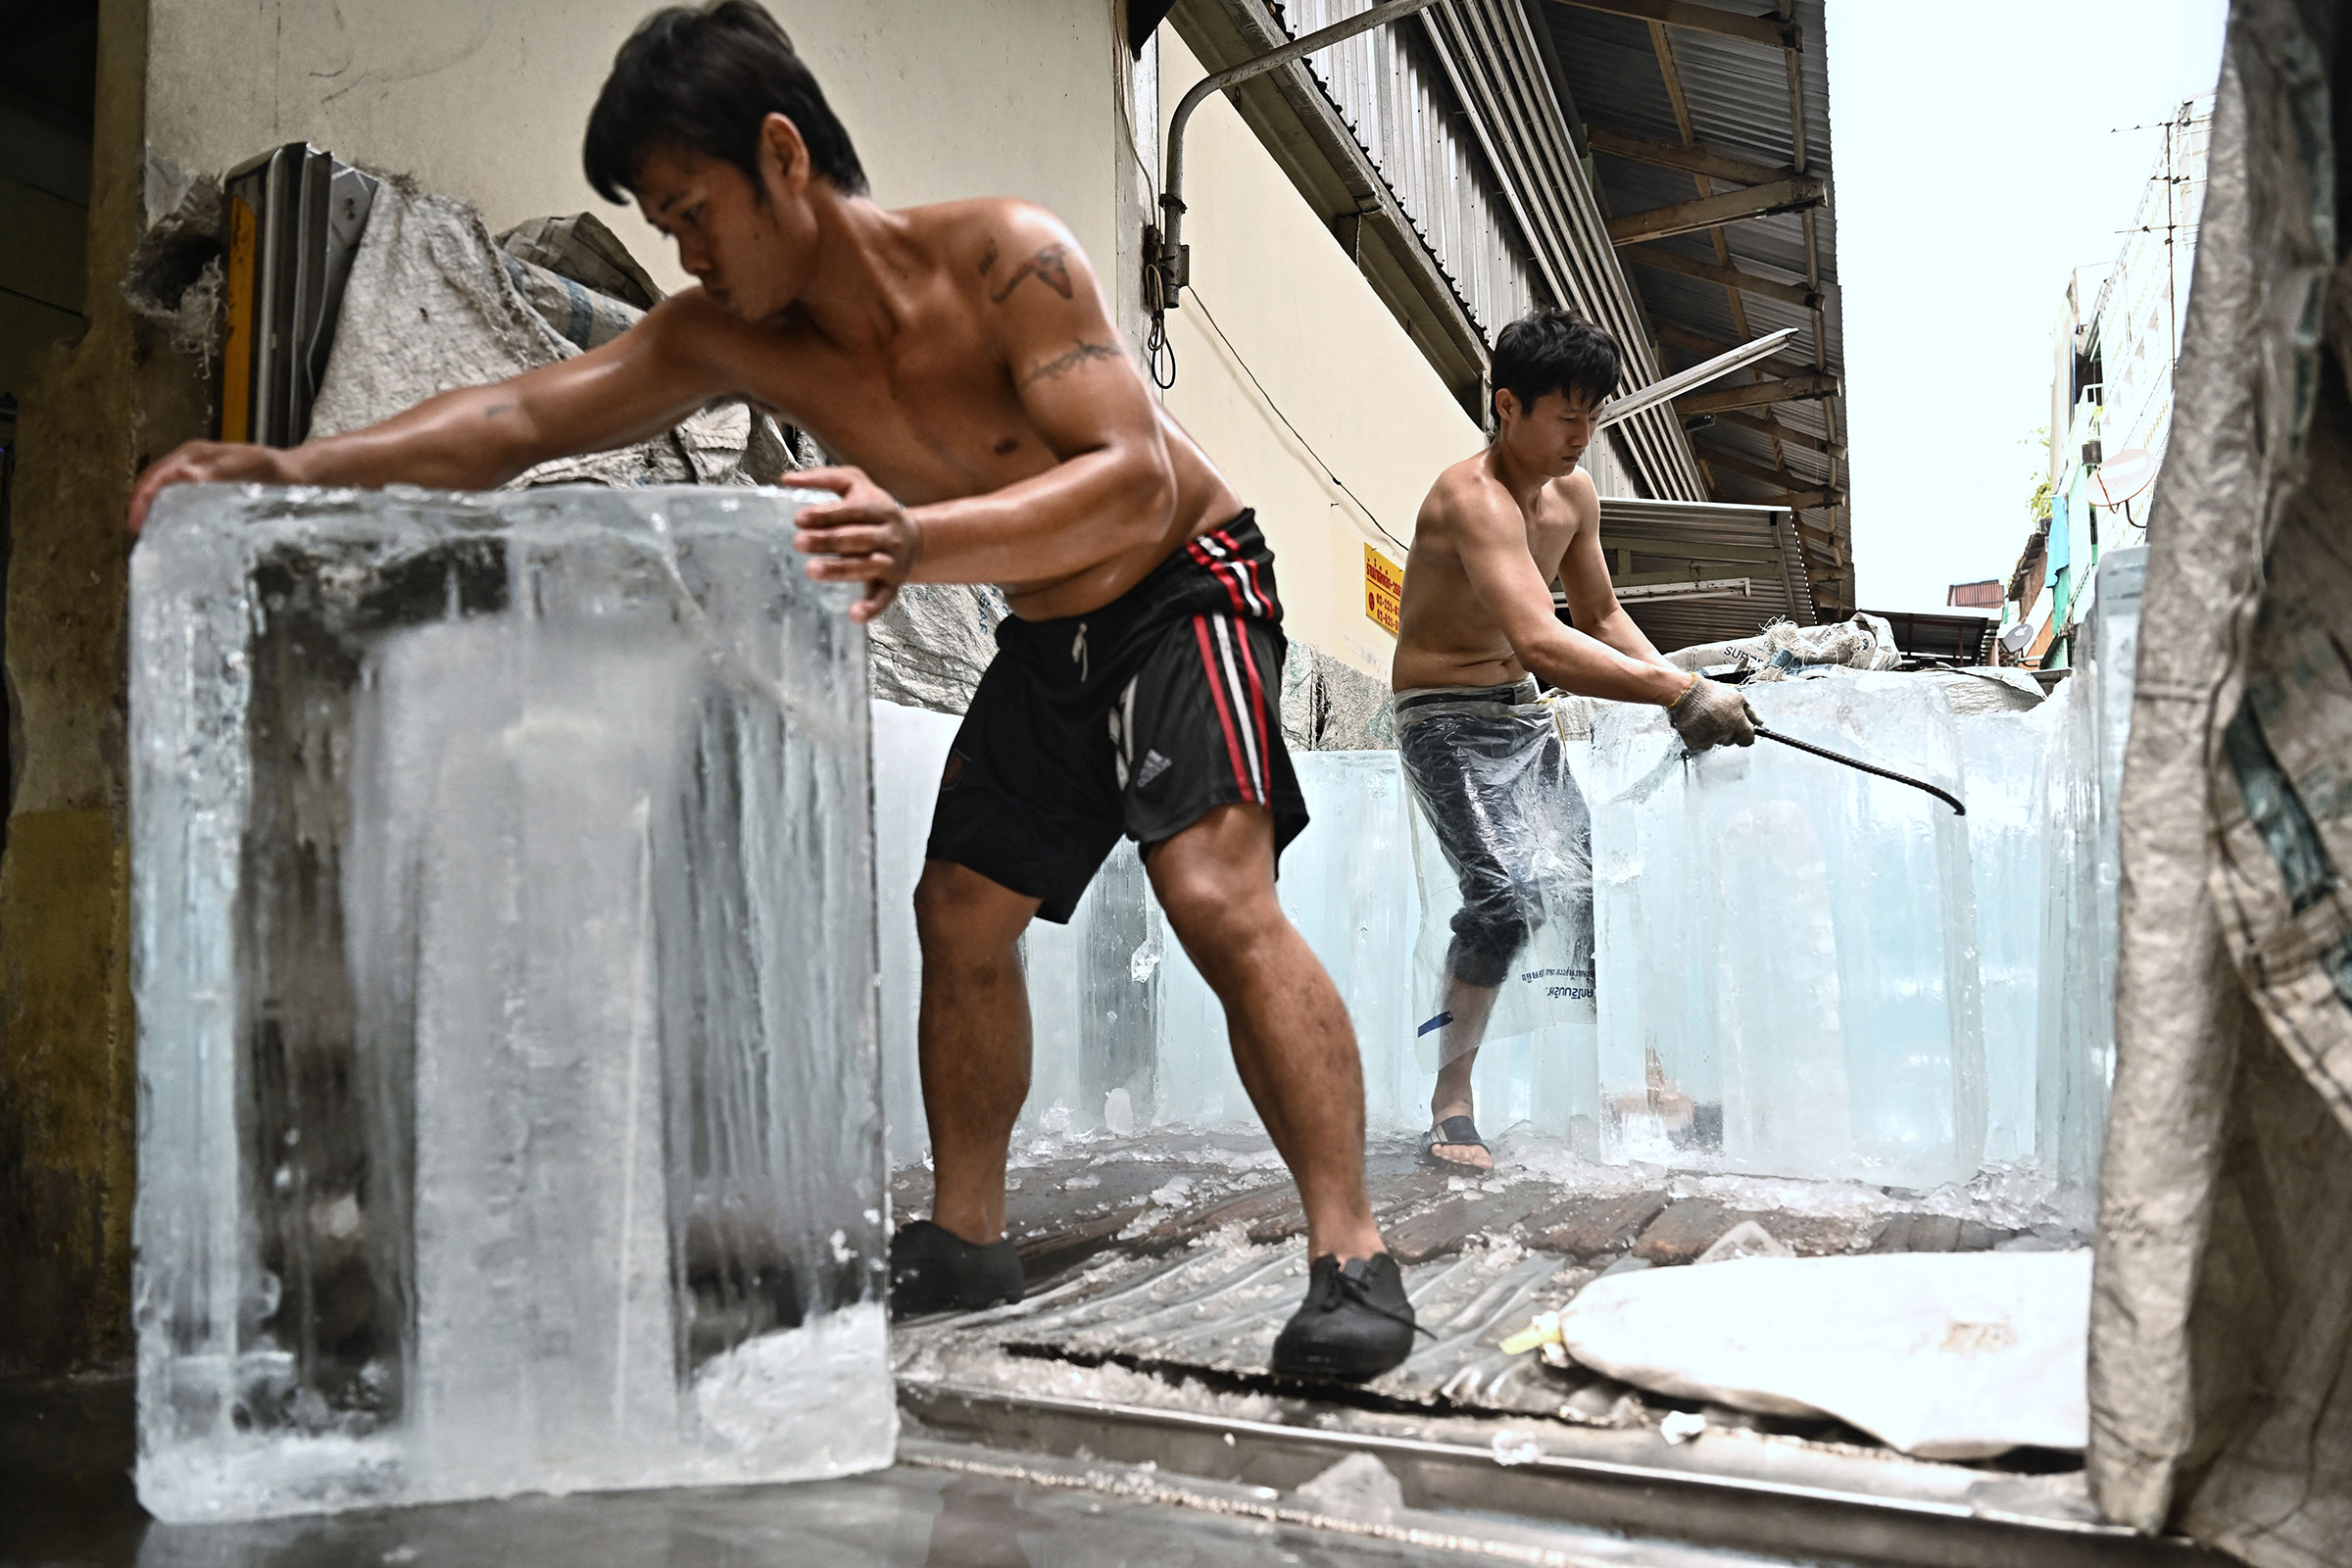 Workers move blocks of ice into a storage unit at a fresh market amid a heatwave in Bangkok, Thailand, on April 25. (Lillian Suwanrumpha—AFP/Getty Images)